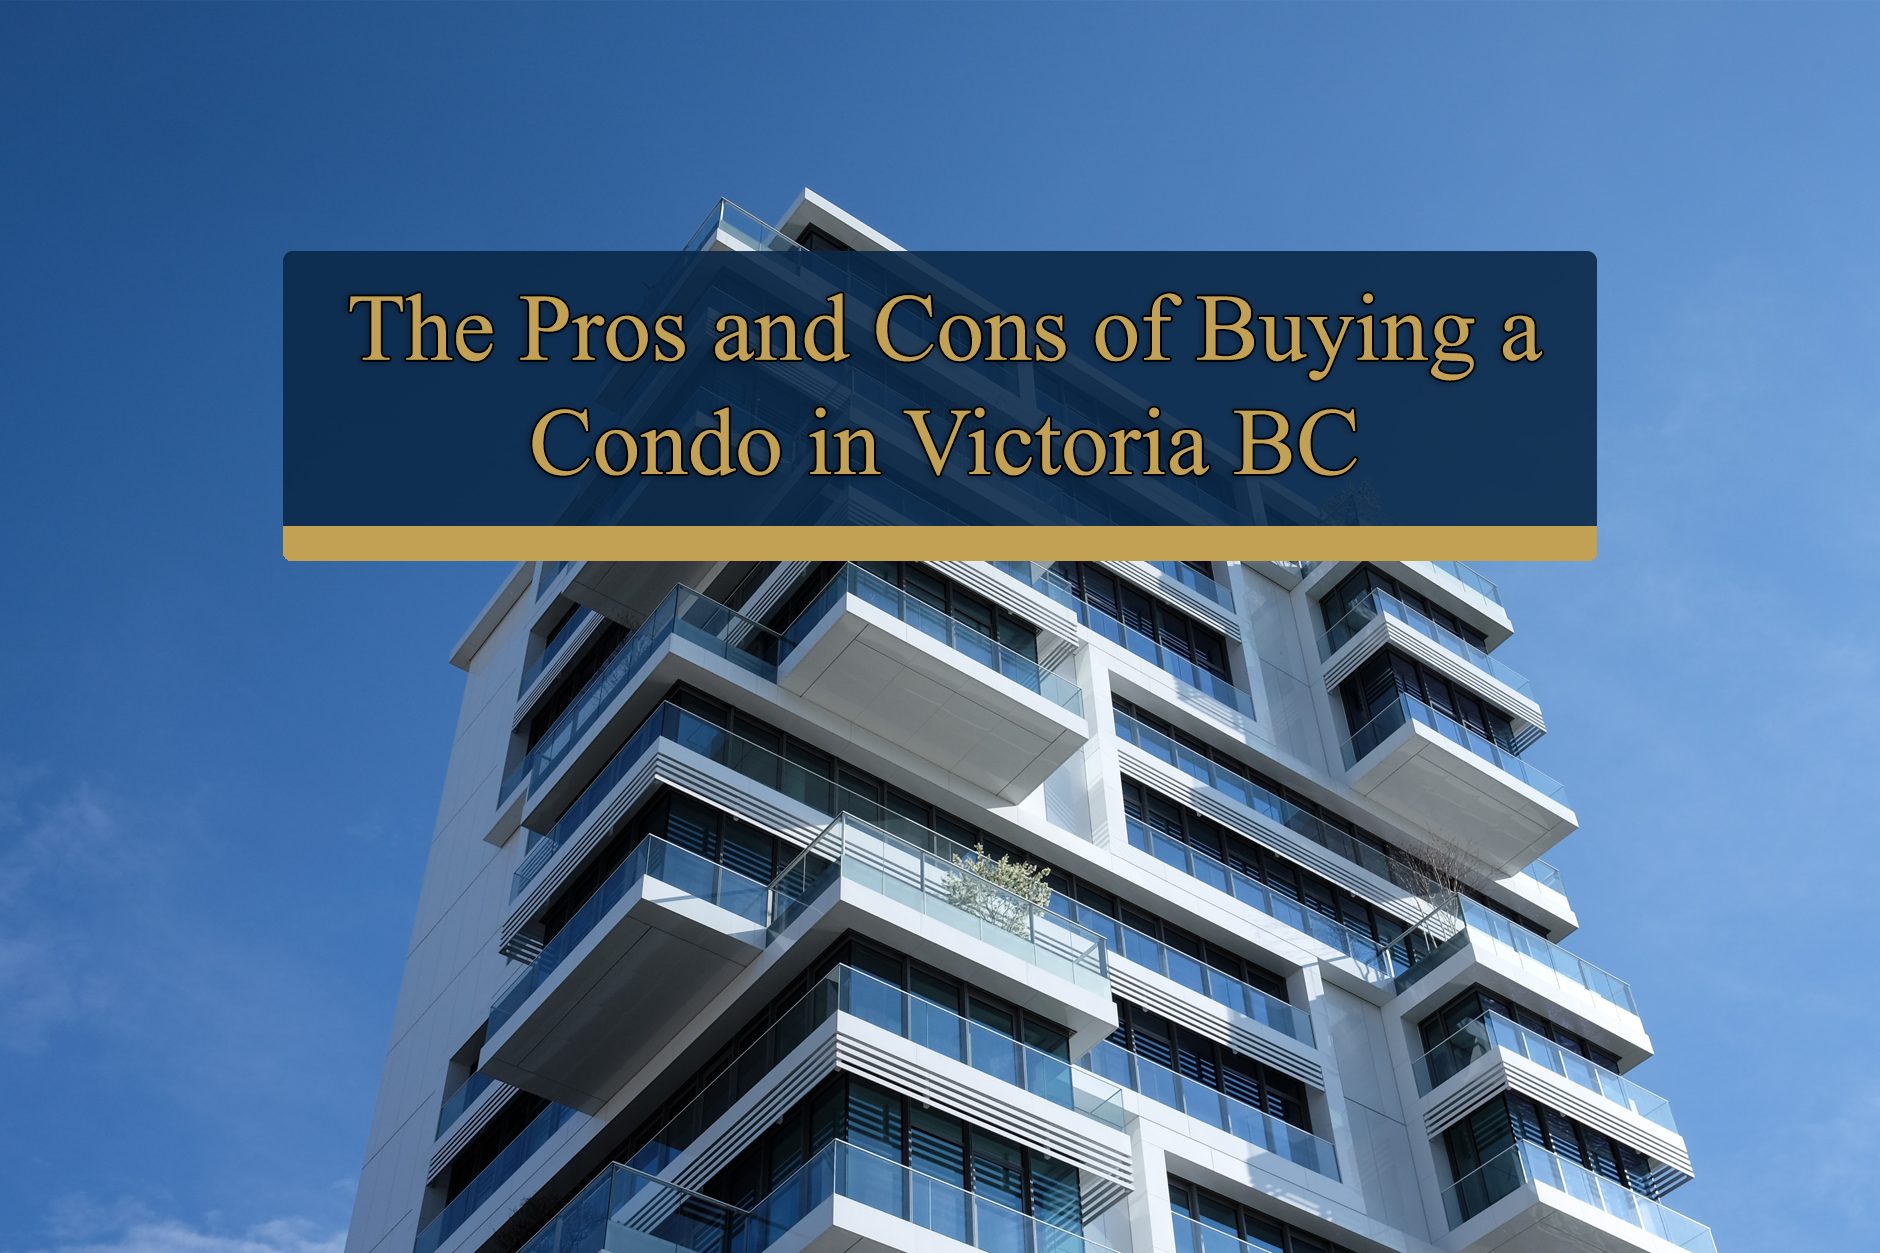 Pros and Cons of Buying a Condo in Victoria BC